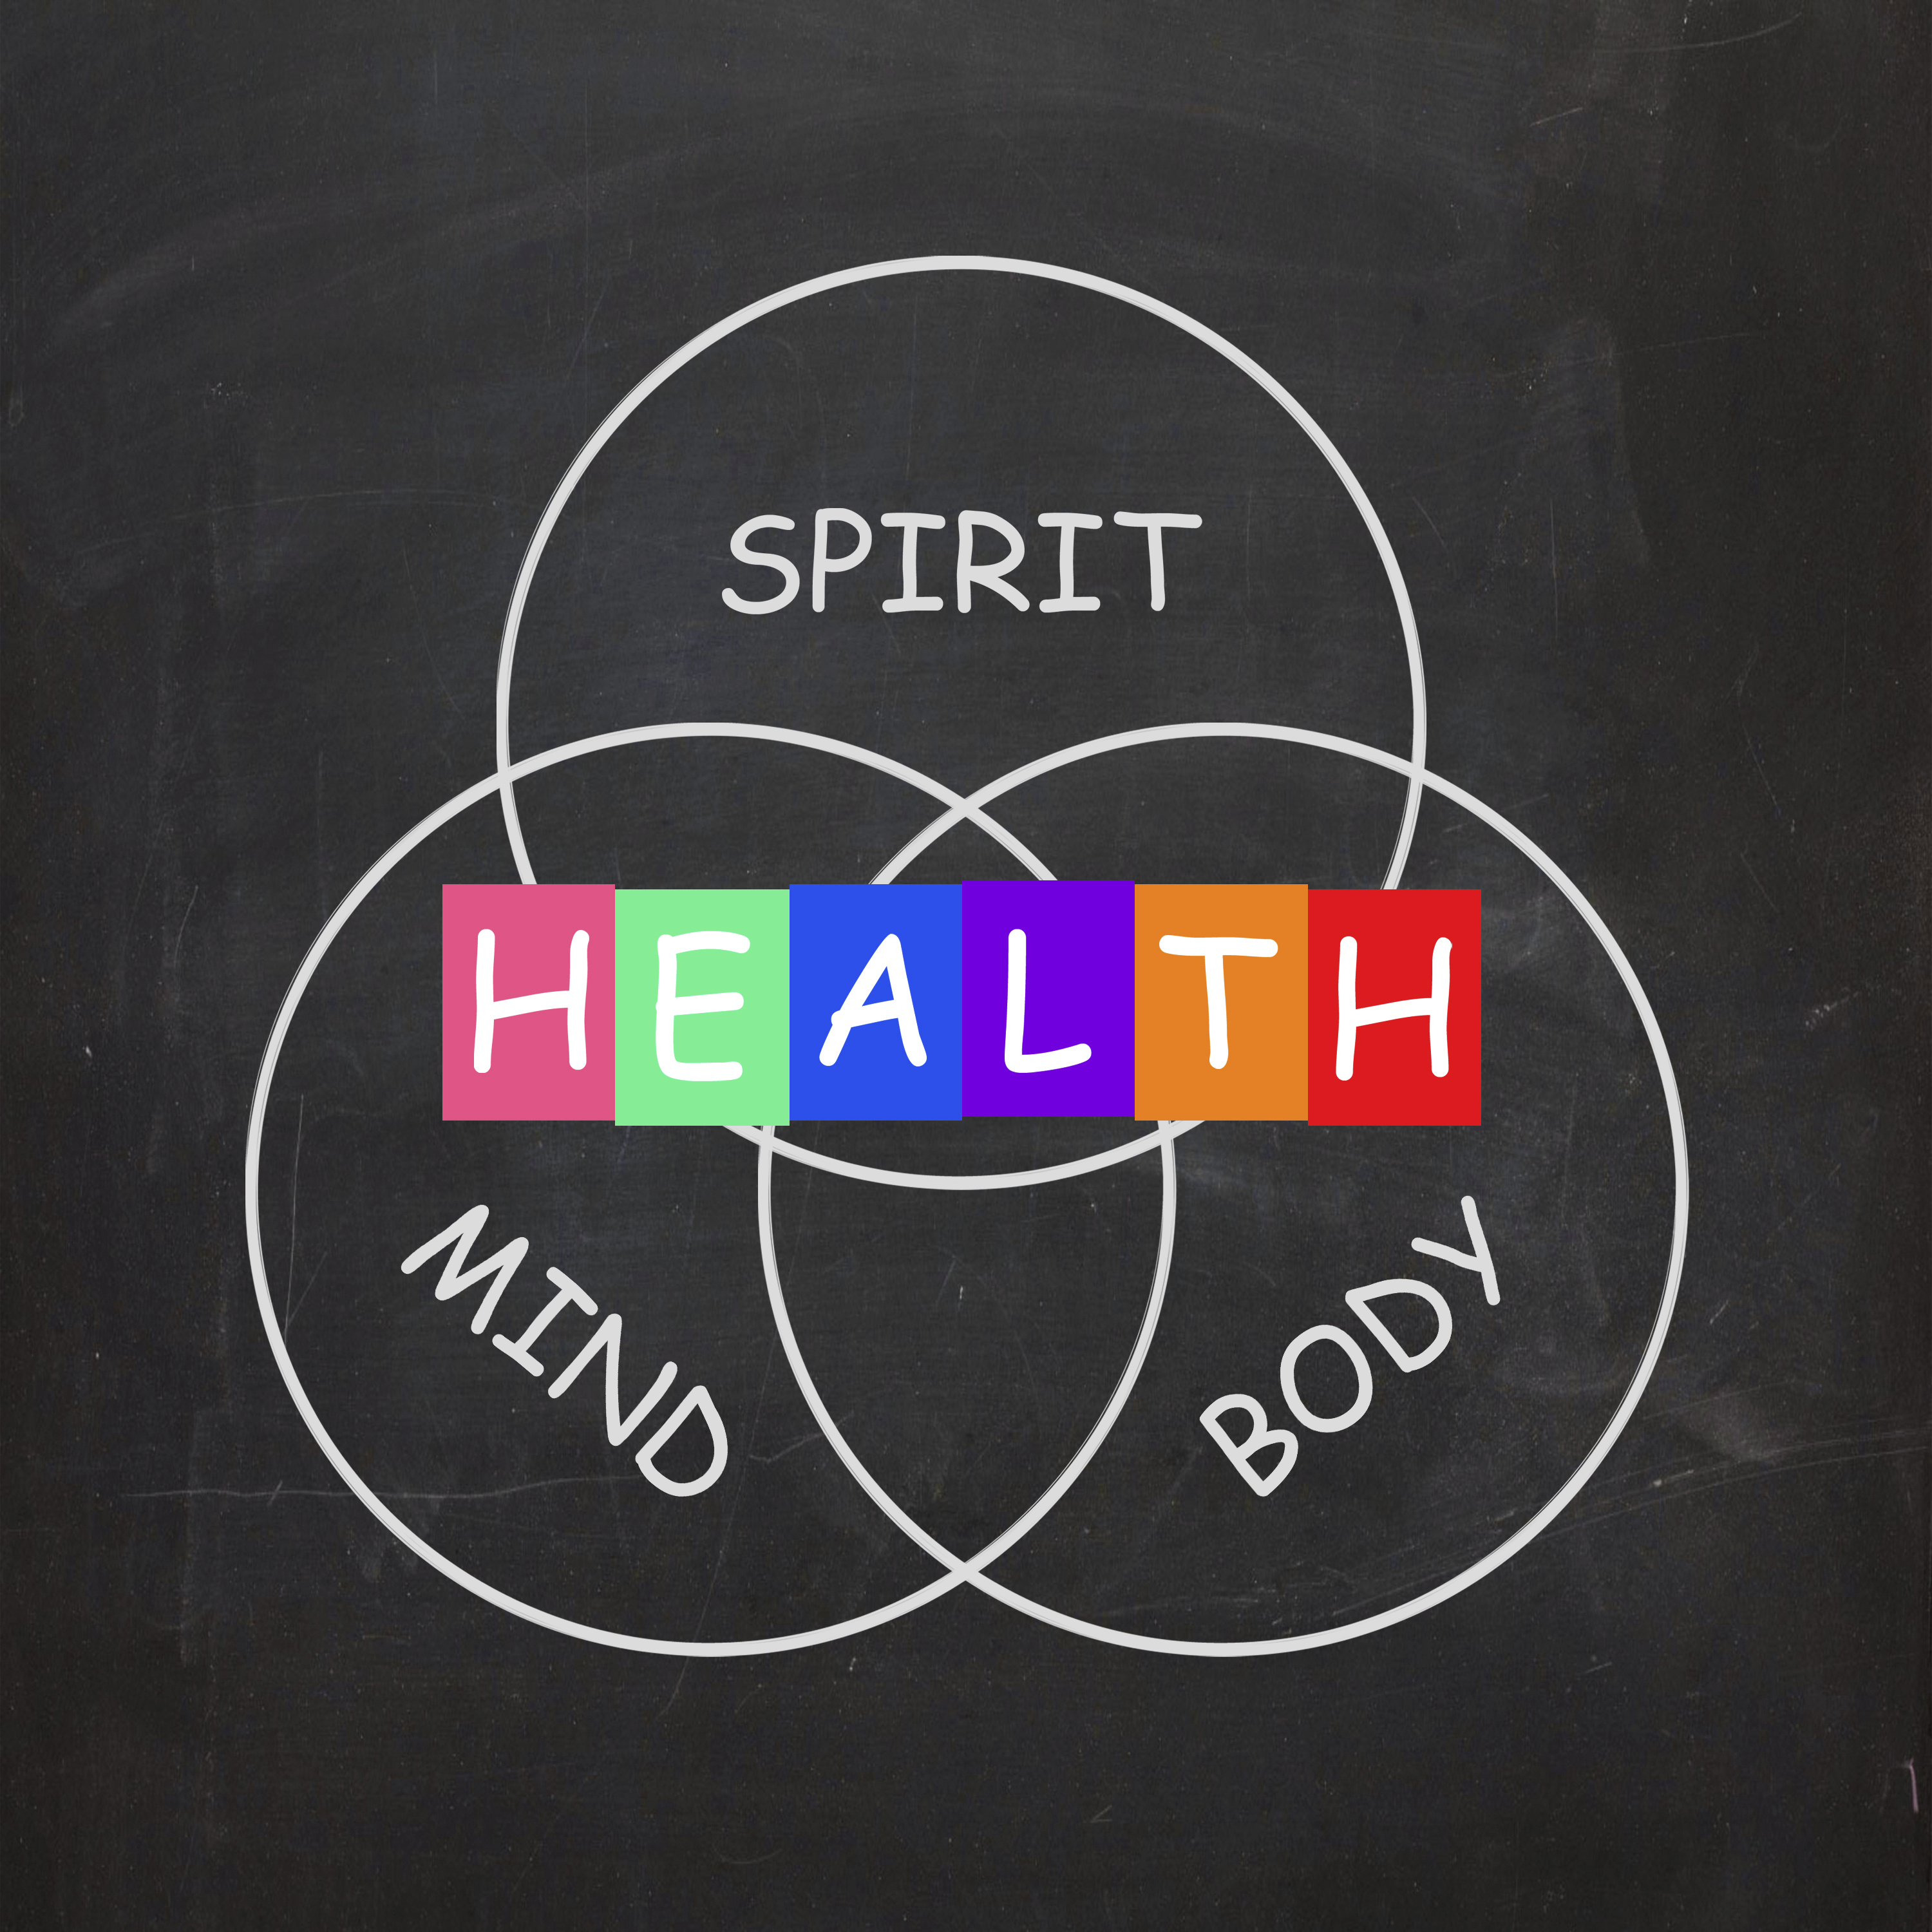 Health of Spirit Mind and Body Means Mindfulness - Fitness & Wellness News